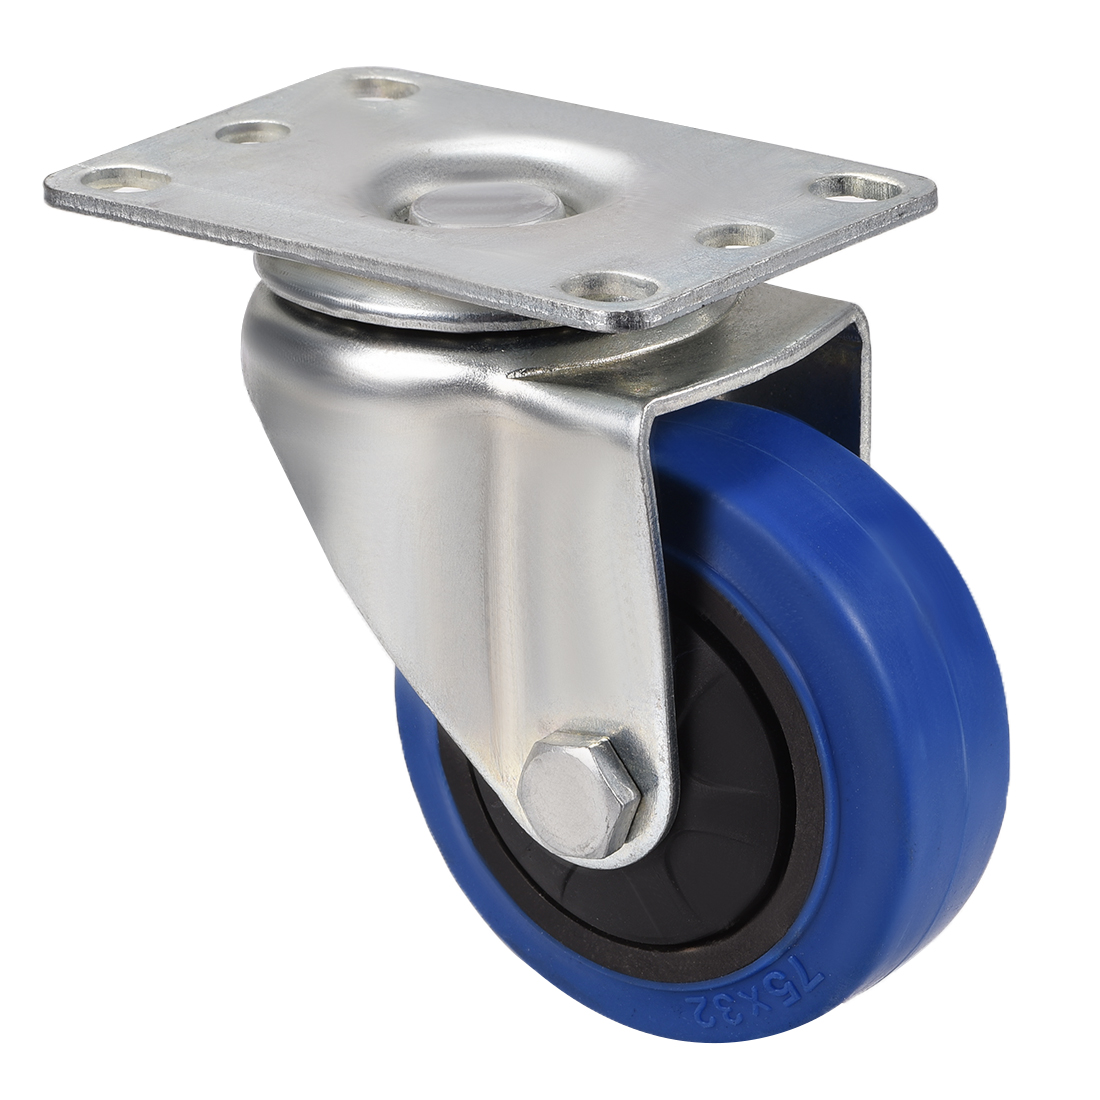 uxcell Swivel Caster Wheels 3 Inch Dia Rubber Caster Top Plate Blue Wheel 132lb Capacity